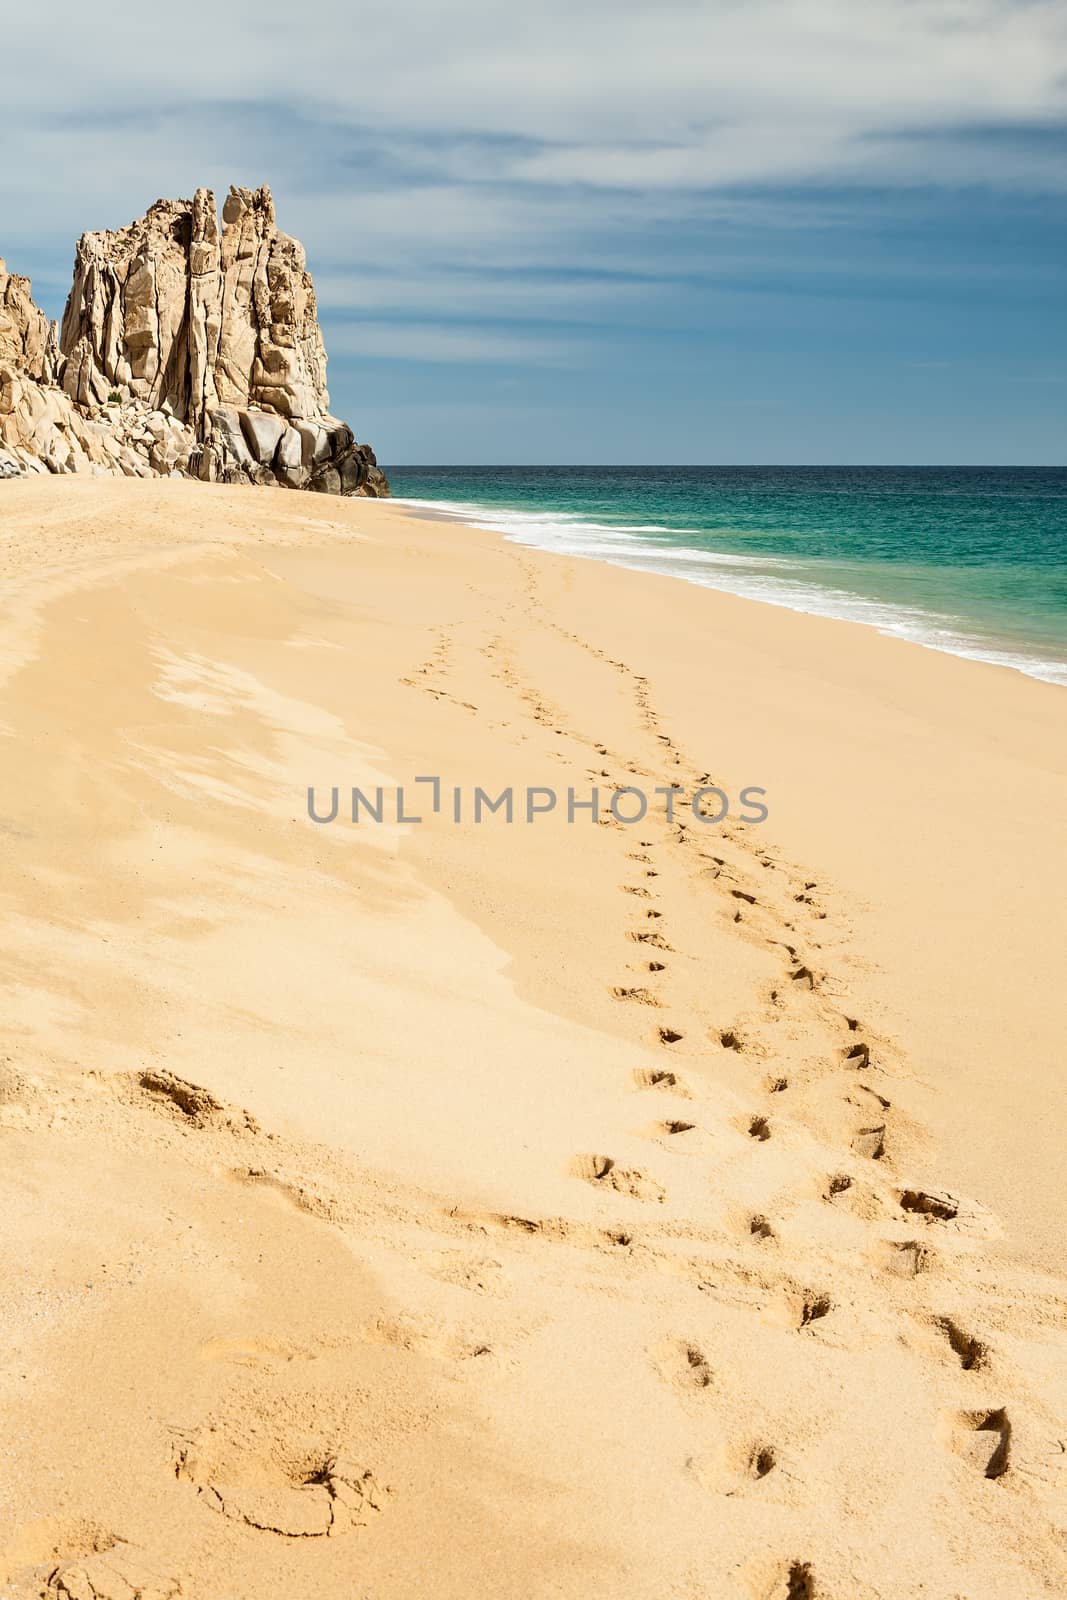 Footsteps in the beach of Cabo San Lucas beach, Mexico